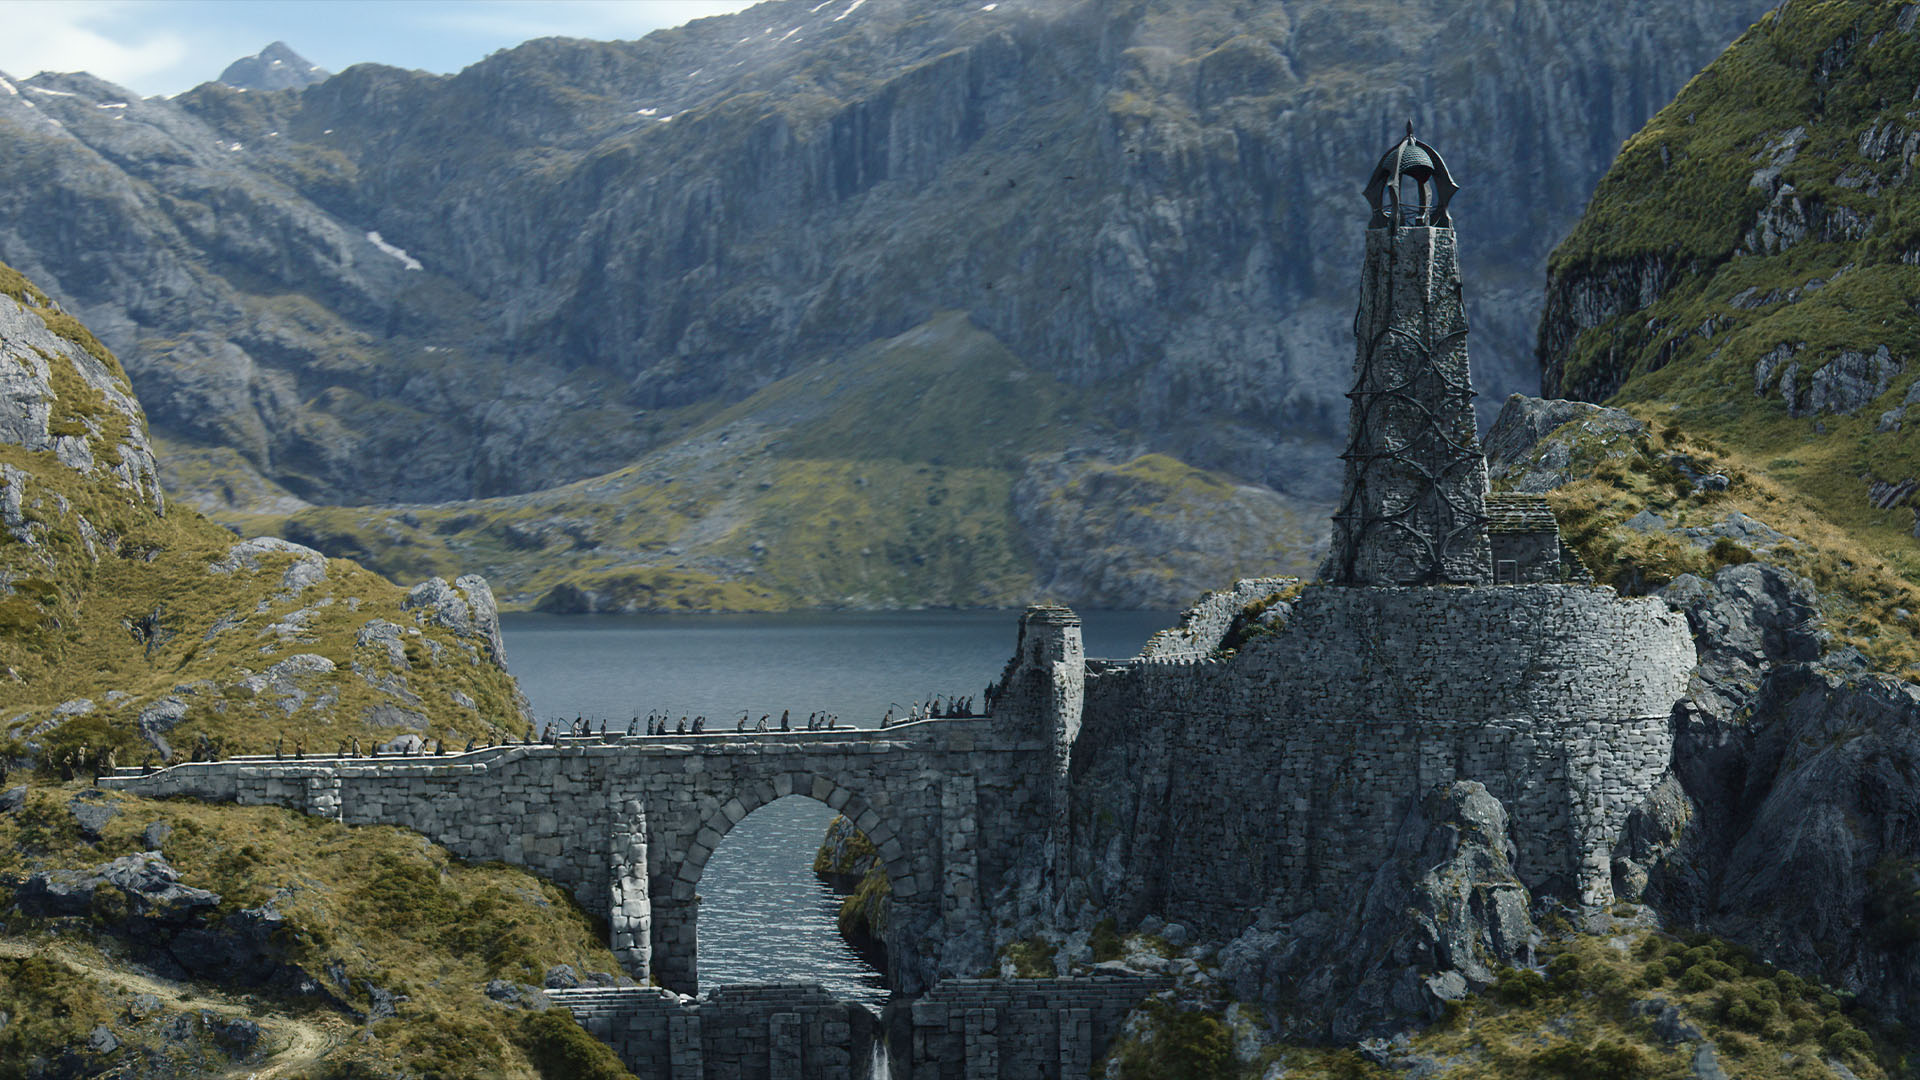 General 1920x1080 The Lord of the Rings Rings of Power TV series bridge film stills lake mountains water tower